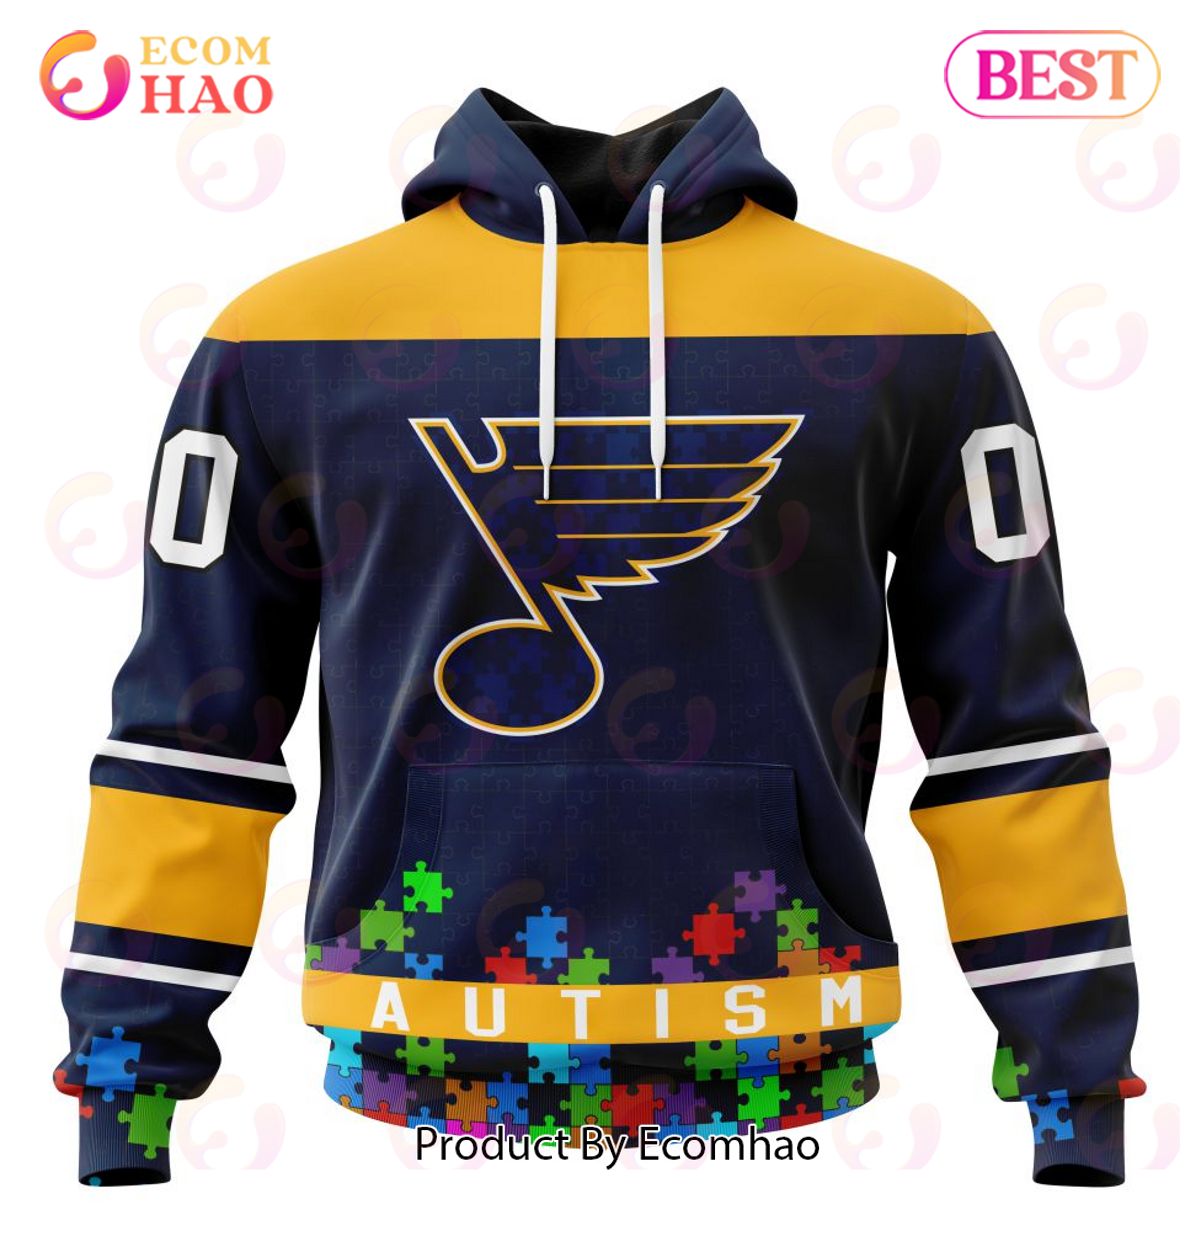 NHL St. Louis Blues Specialized Unisex Kits Hockey Fights Against Autism 3D Hoodie